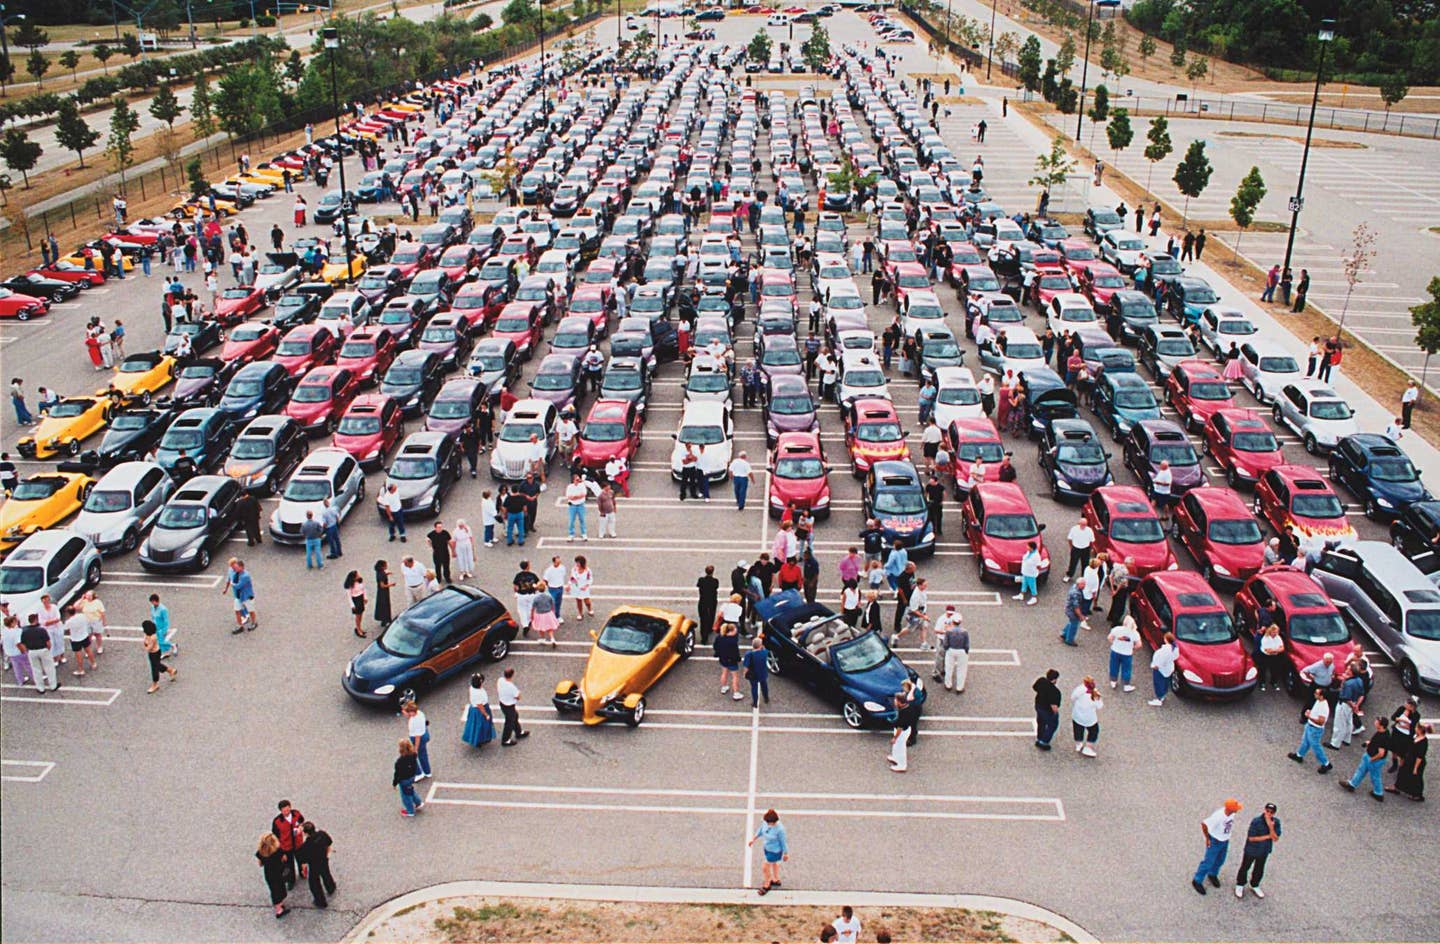 More than 500 Chrysler PT Cruiser and Chrysler Prowler vehicles gathered in Auburn Hills, Michigan in August, 2001. The company was then called DaimlerChrysler. <em>Stellantis Archive</em>